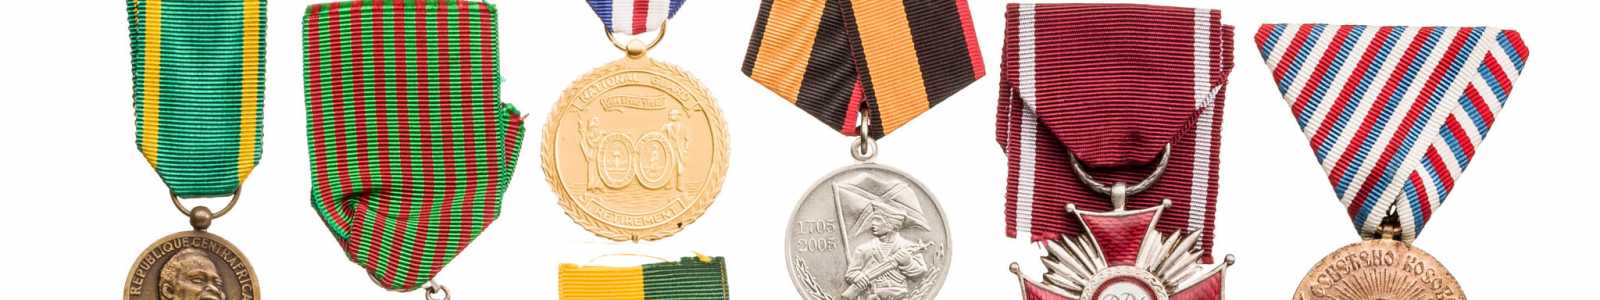 O88: International medals & military historical collectibles